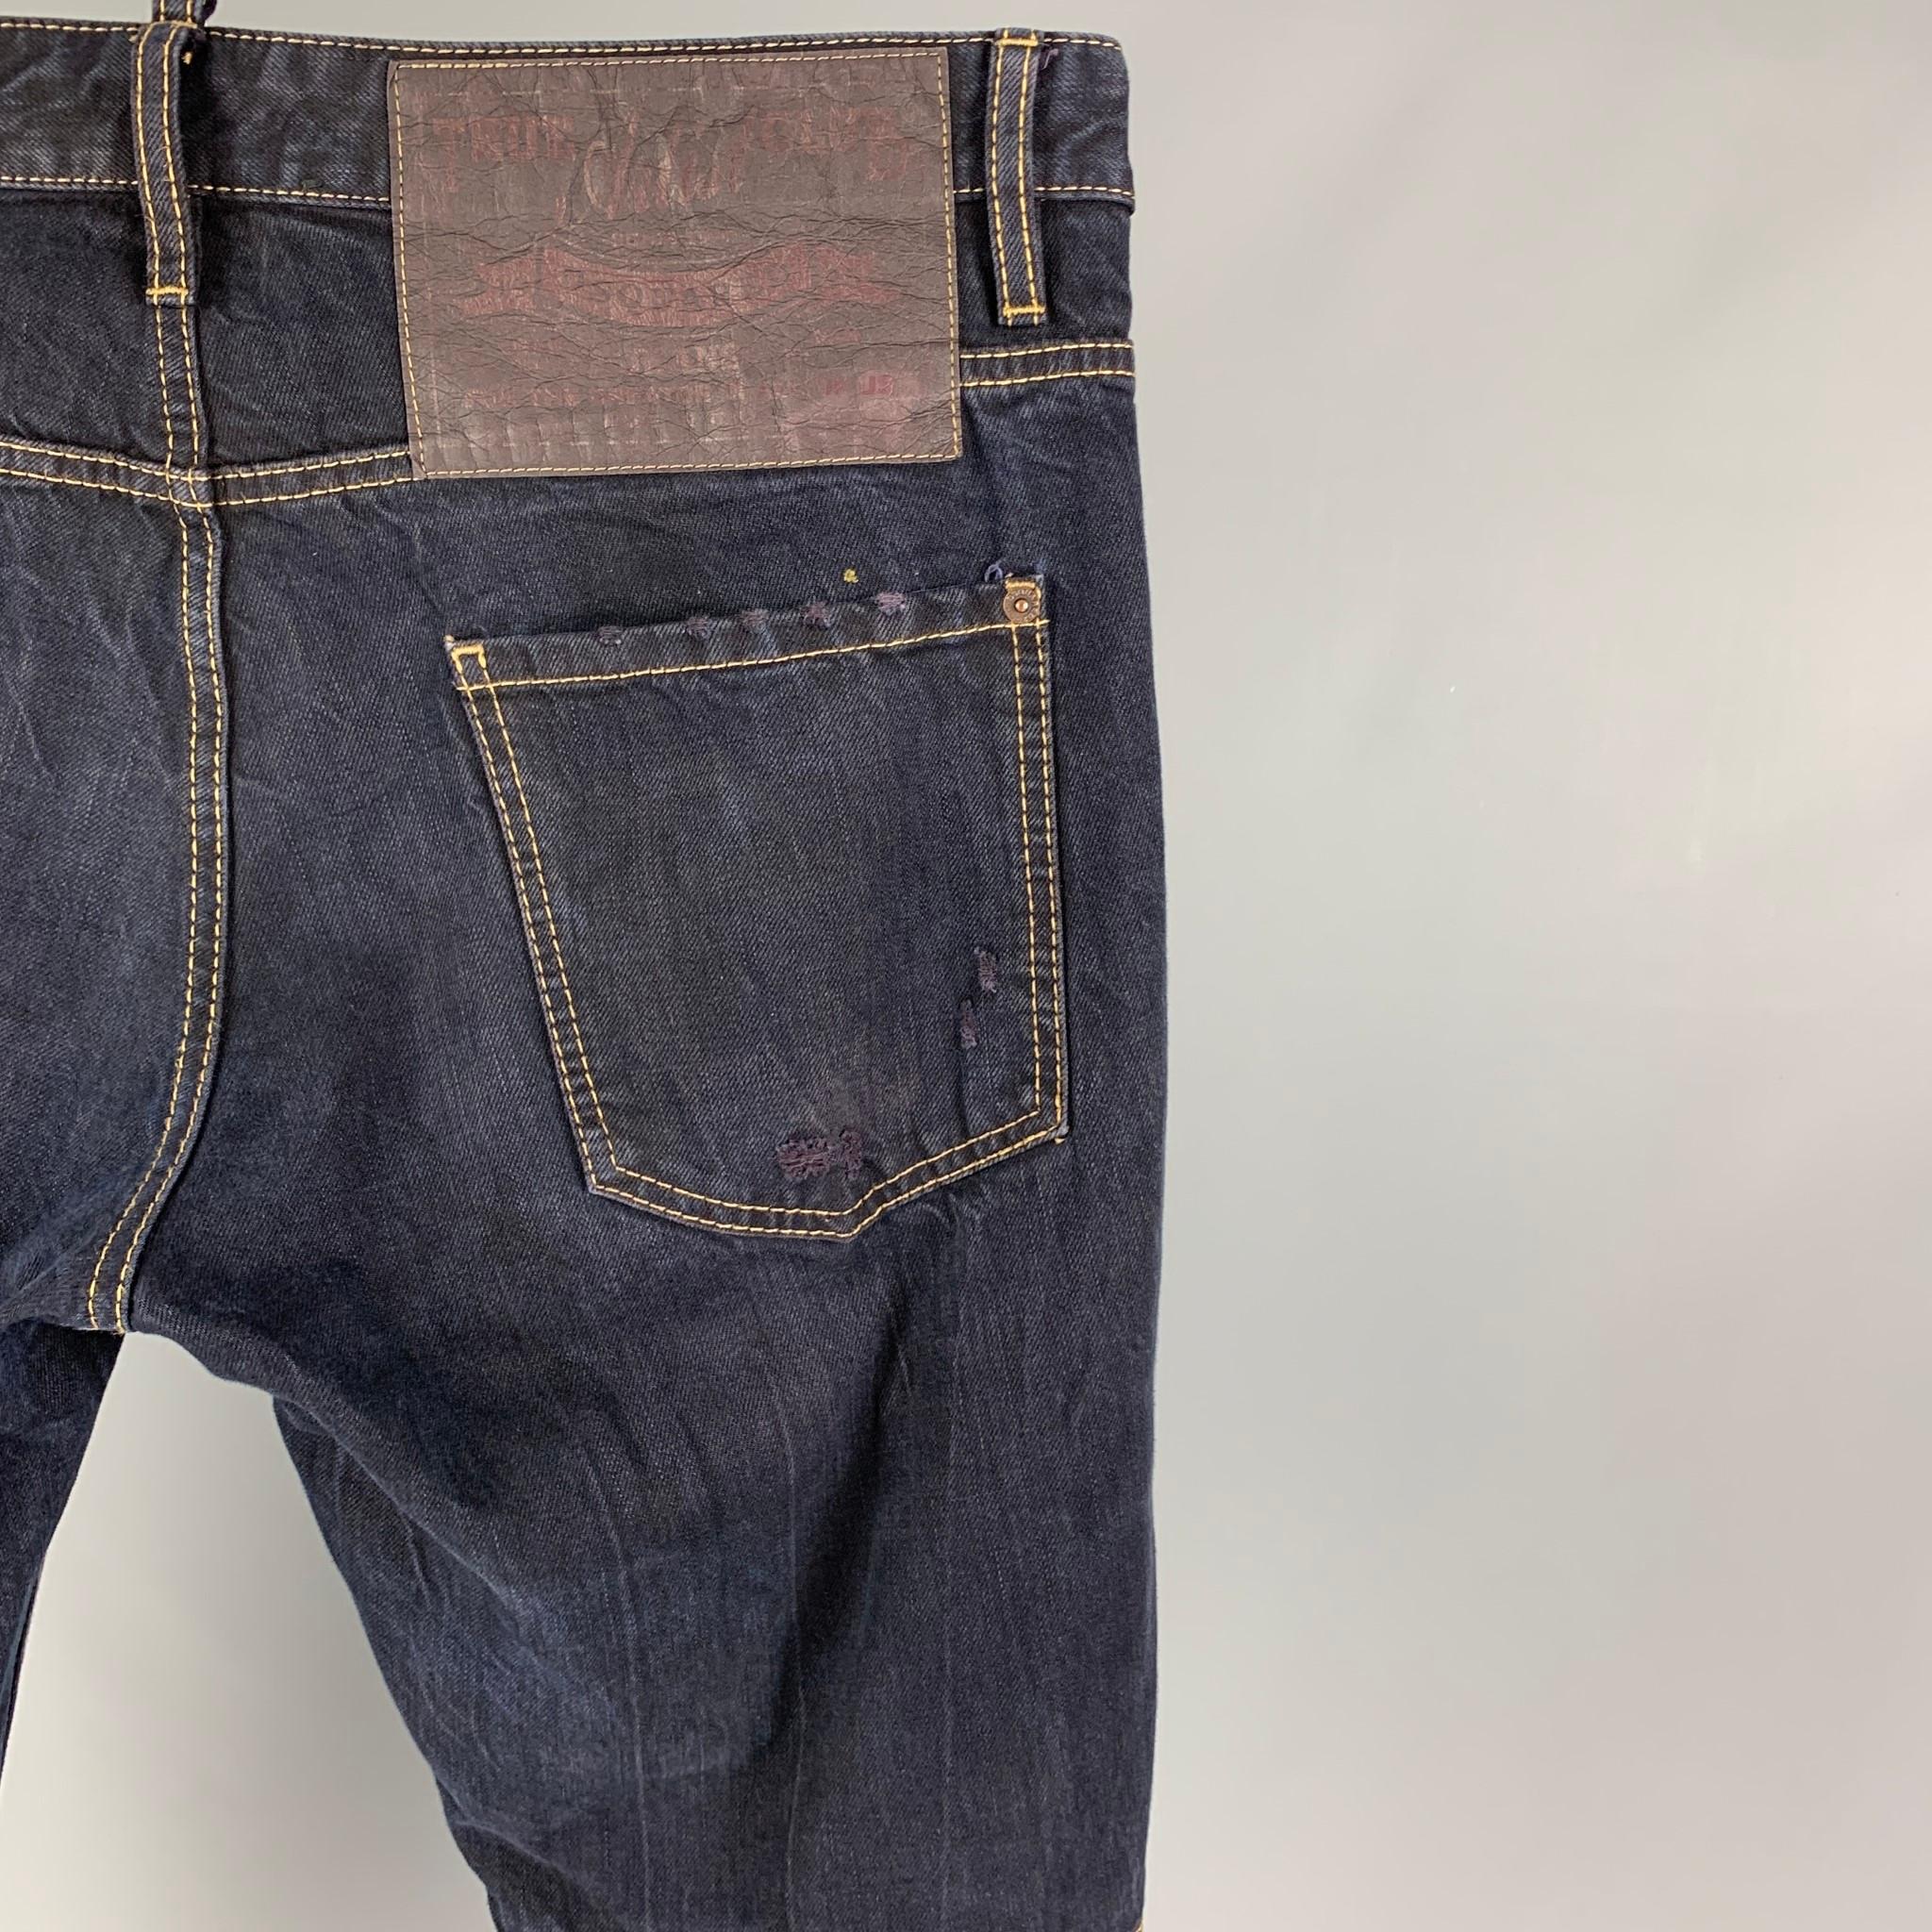 DSQUARED2 jeans comes in a dark navy distressed cotton featuring cropped style, contrast stitching, and a button fly closure. Made in Italy. 

Good Pre-Owned Condition.
Marked: 50

Measurements:

Waist: 36 in.
Rise: 11 in.
Inseam: 26 in. 